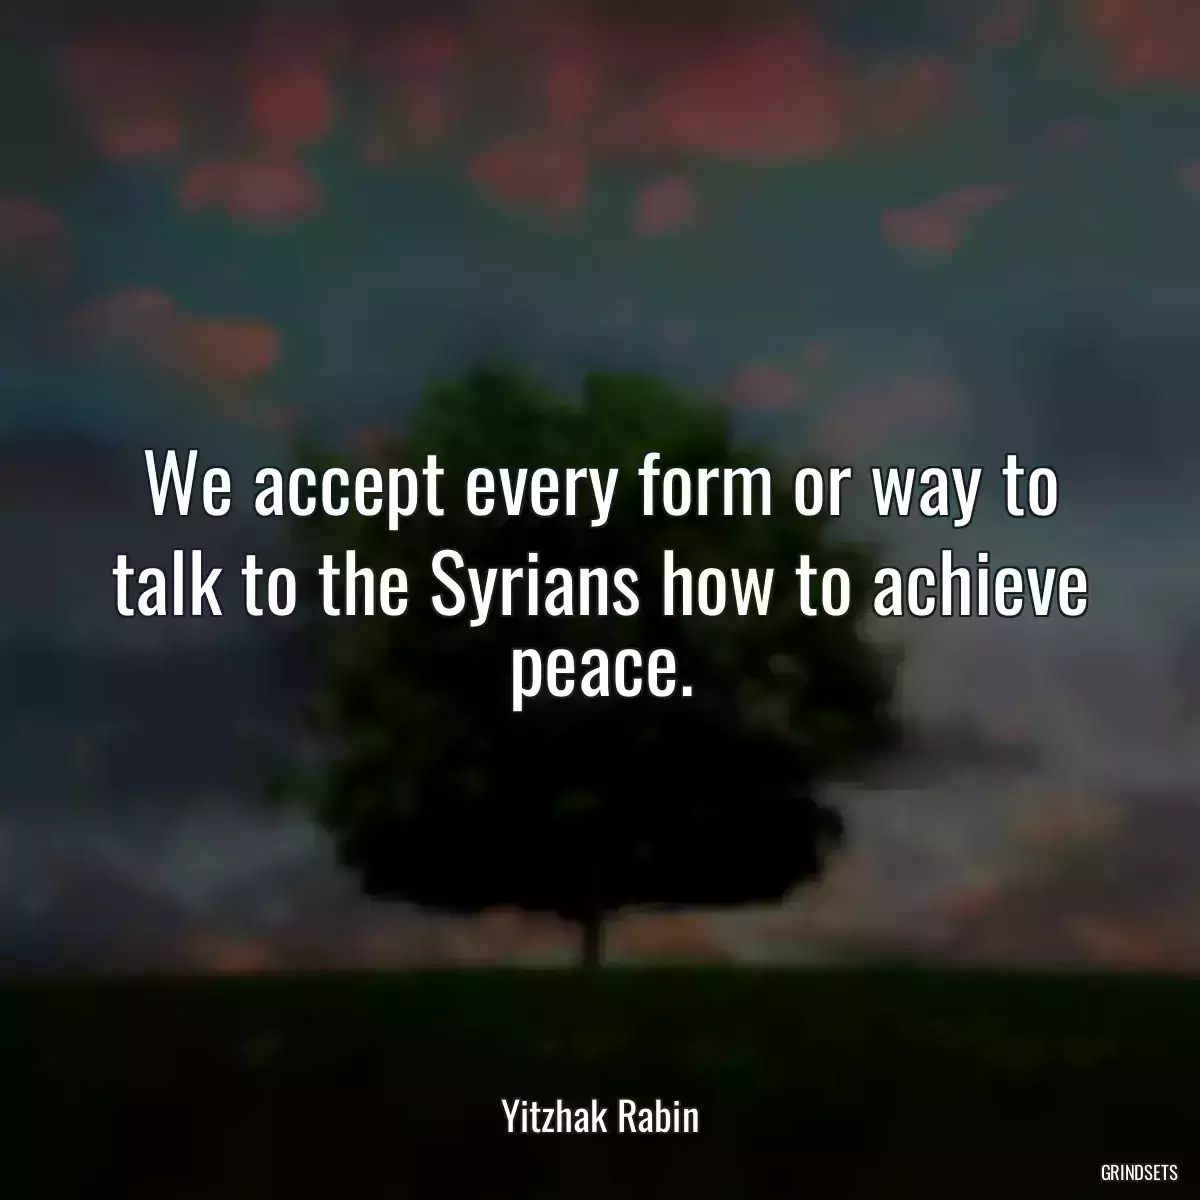 We accept every form or way to talk to the Syrians how to achieve peace.